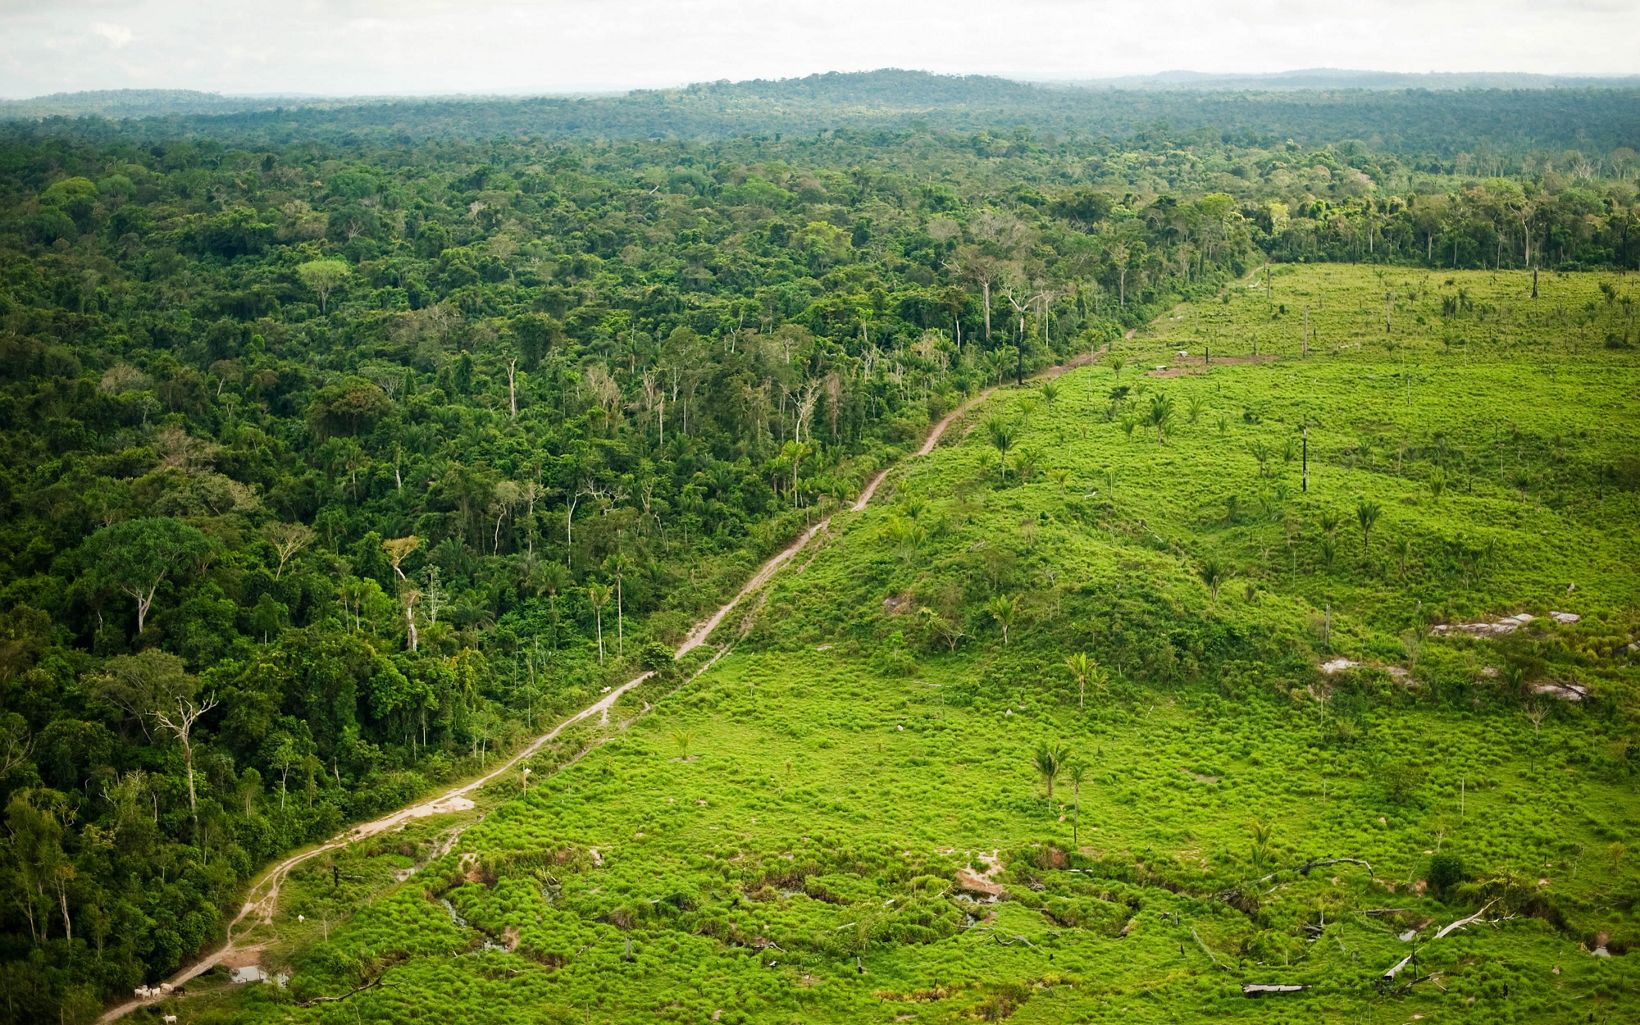 Cattle ranching  An aerial view showing deforestation for cattle ranching at São Félix do Xingu, a municipality in the Brazilian Amazon, that has one of the highest rates of deforestation.  © Haroldo Palo Jr.